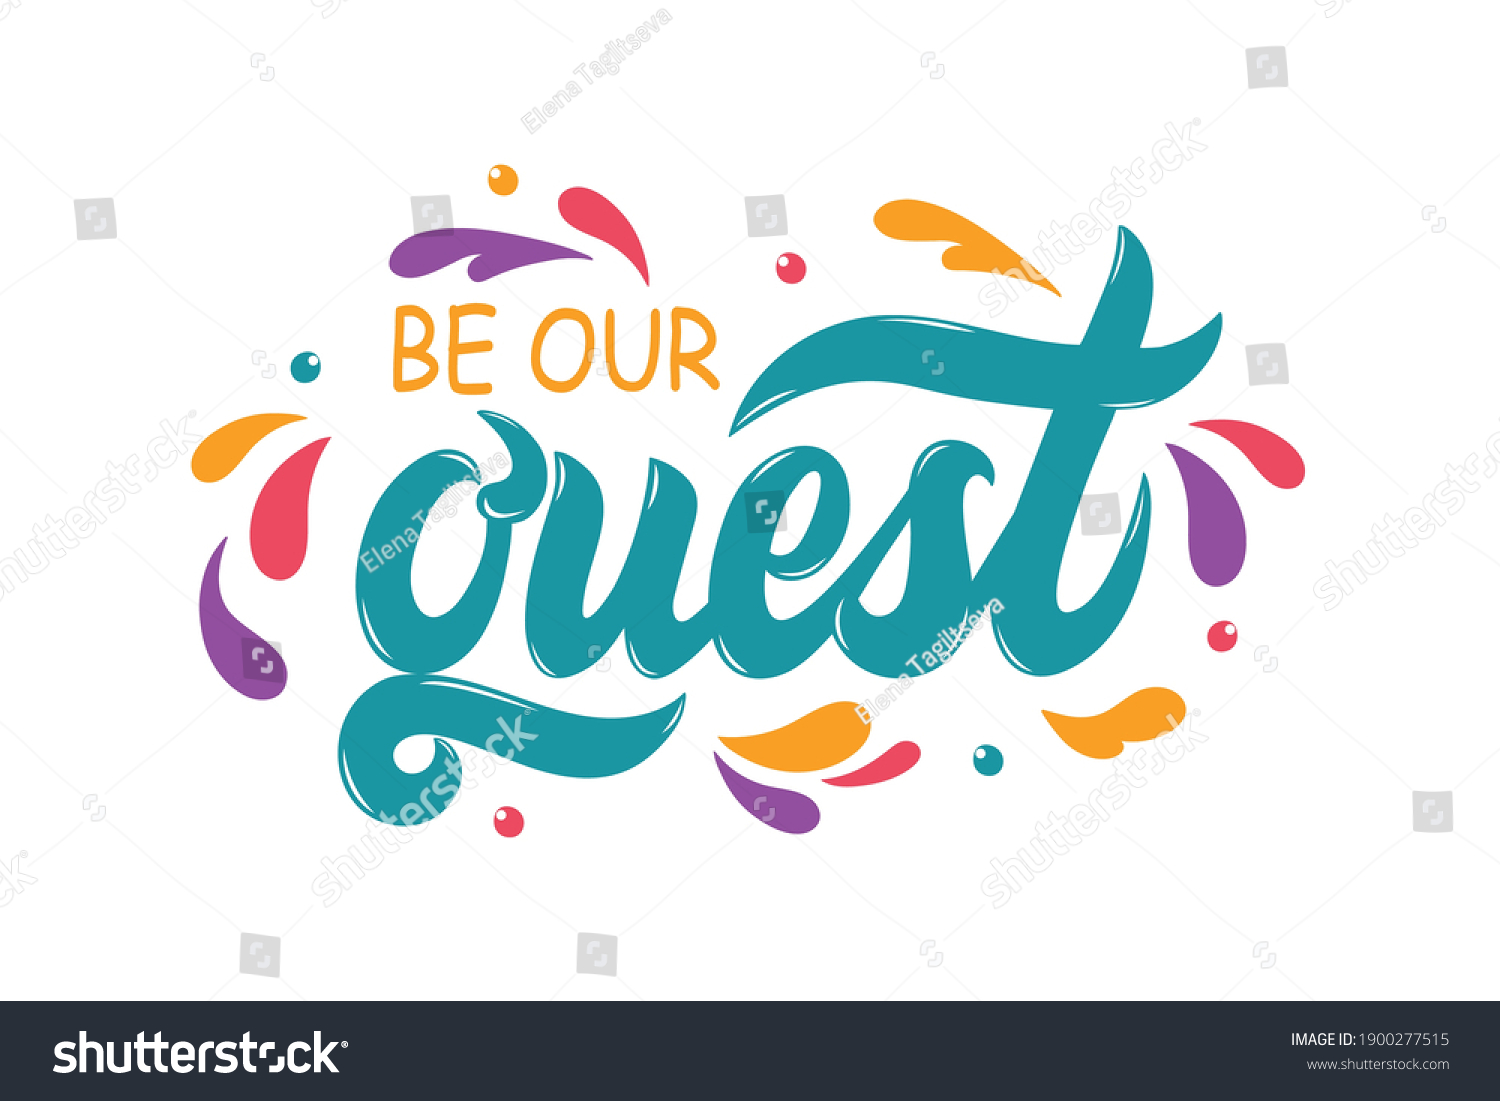 SVG of Be our guest text isolated on white background. Handdrawn lettering. Modern brush calligraphy. Colorful vector illustration. Design for invitation, greeting card, birthday party and wedding collection svg